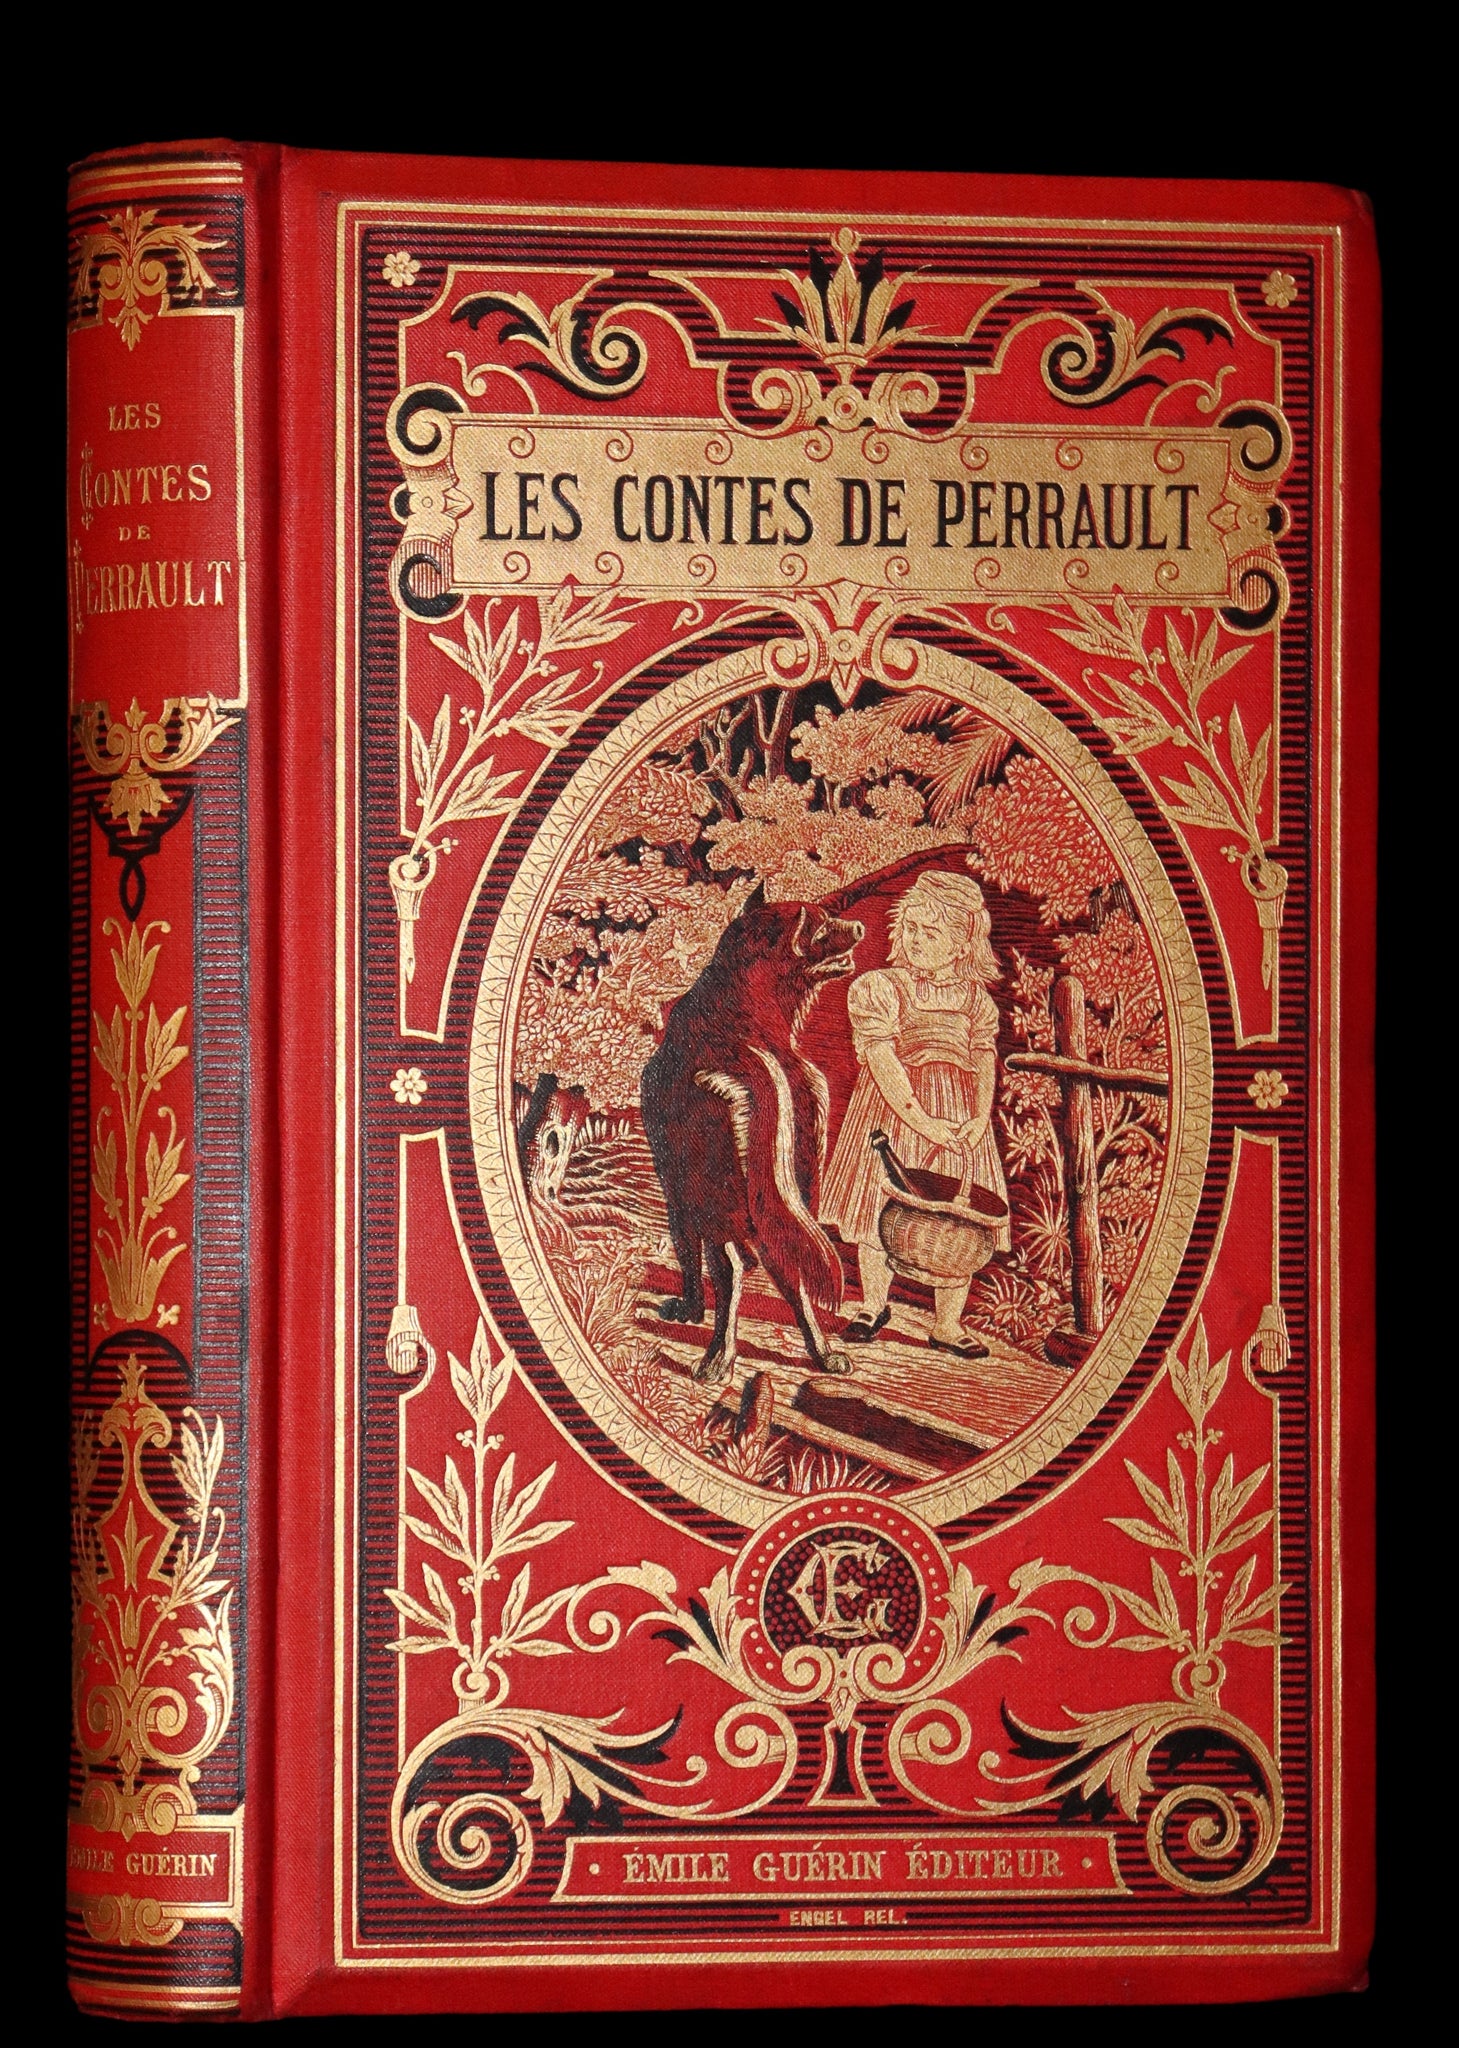 1890 Rare illustrated French Book ~ Contes de Perrault - Fairy Tales.